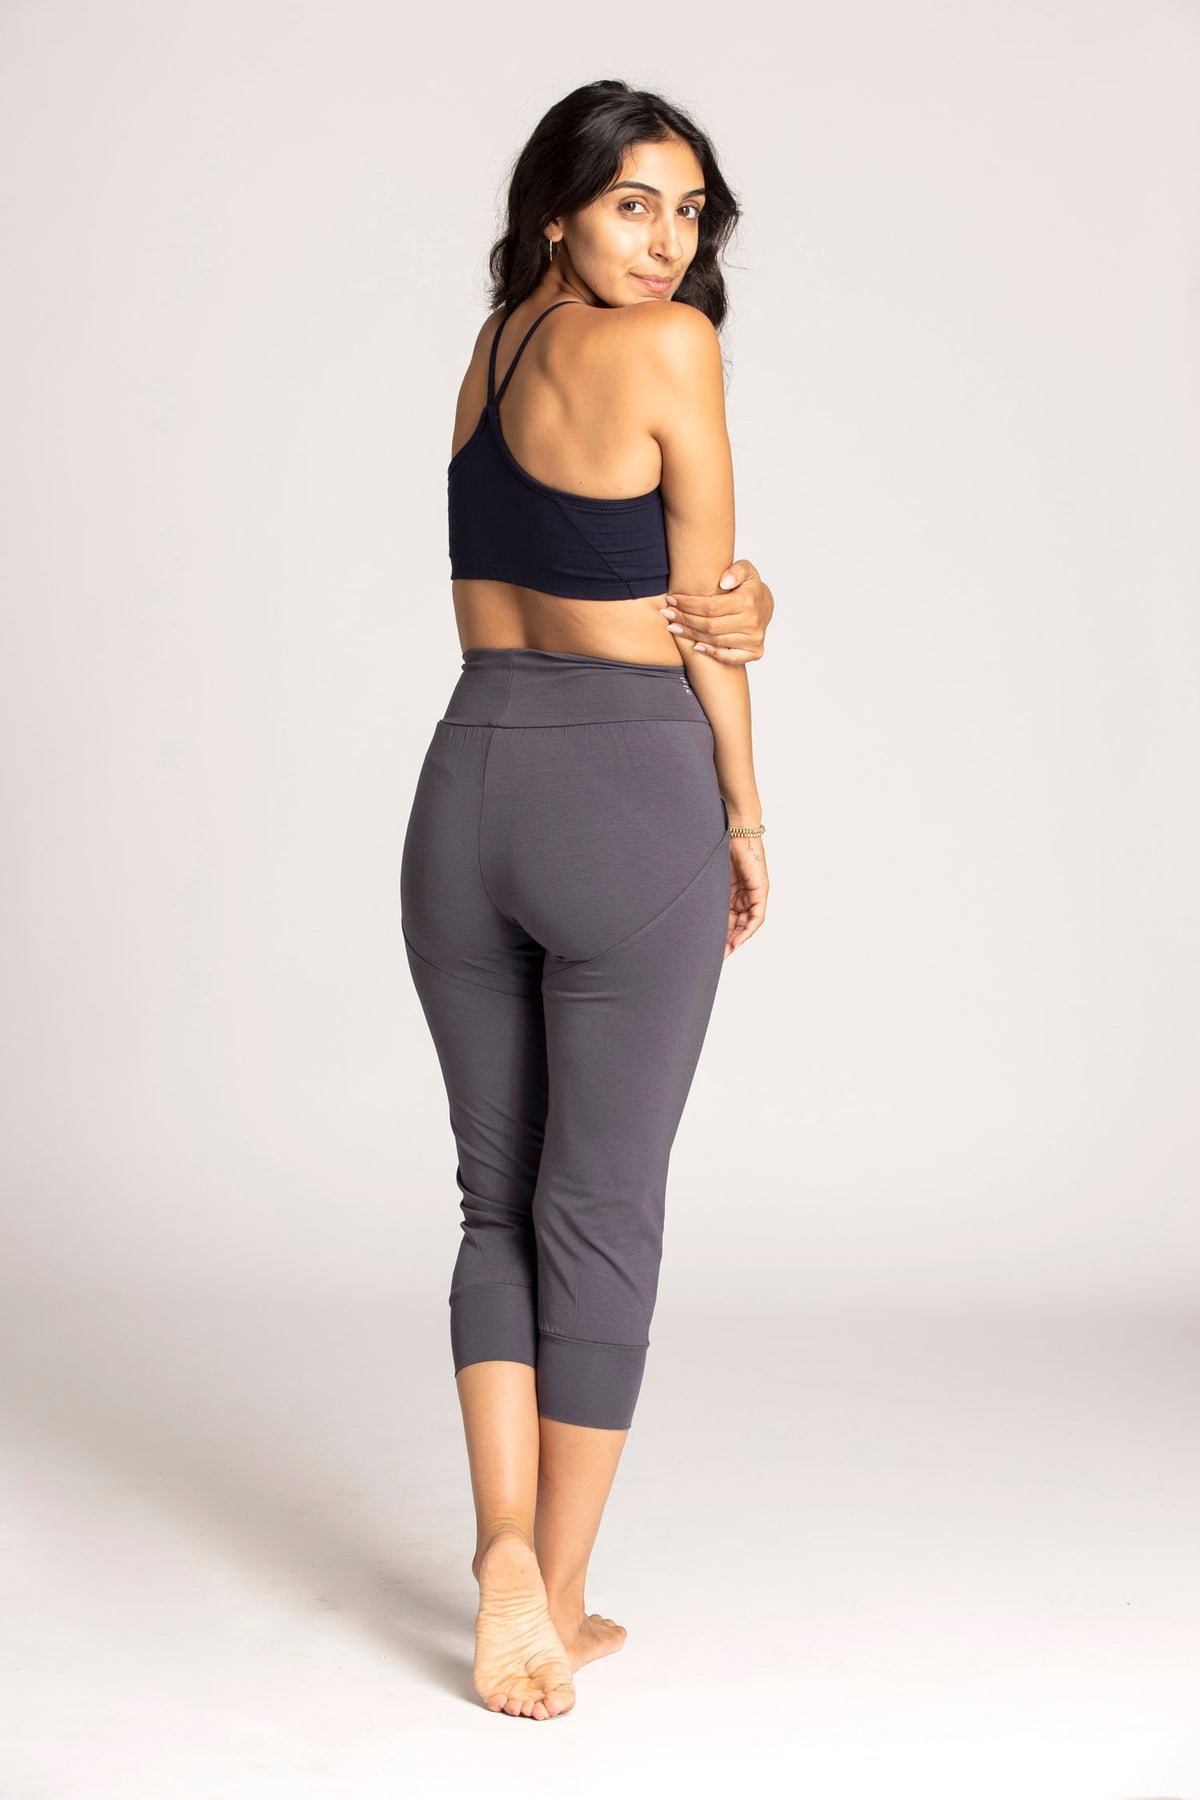 50%off I’mPerfect Organic Cotton Slouchy Capri Pants was 35%off